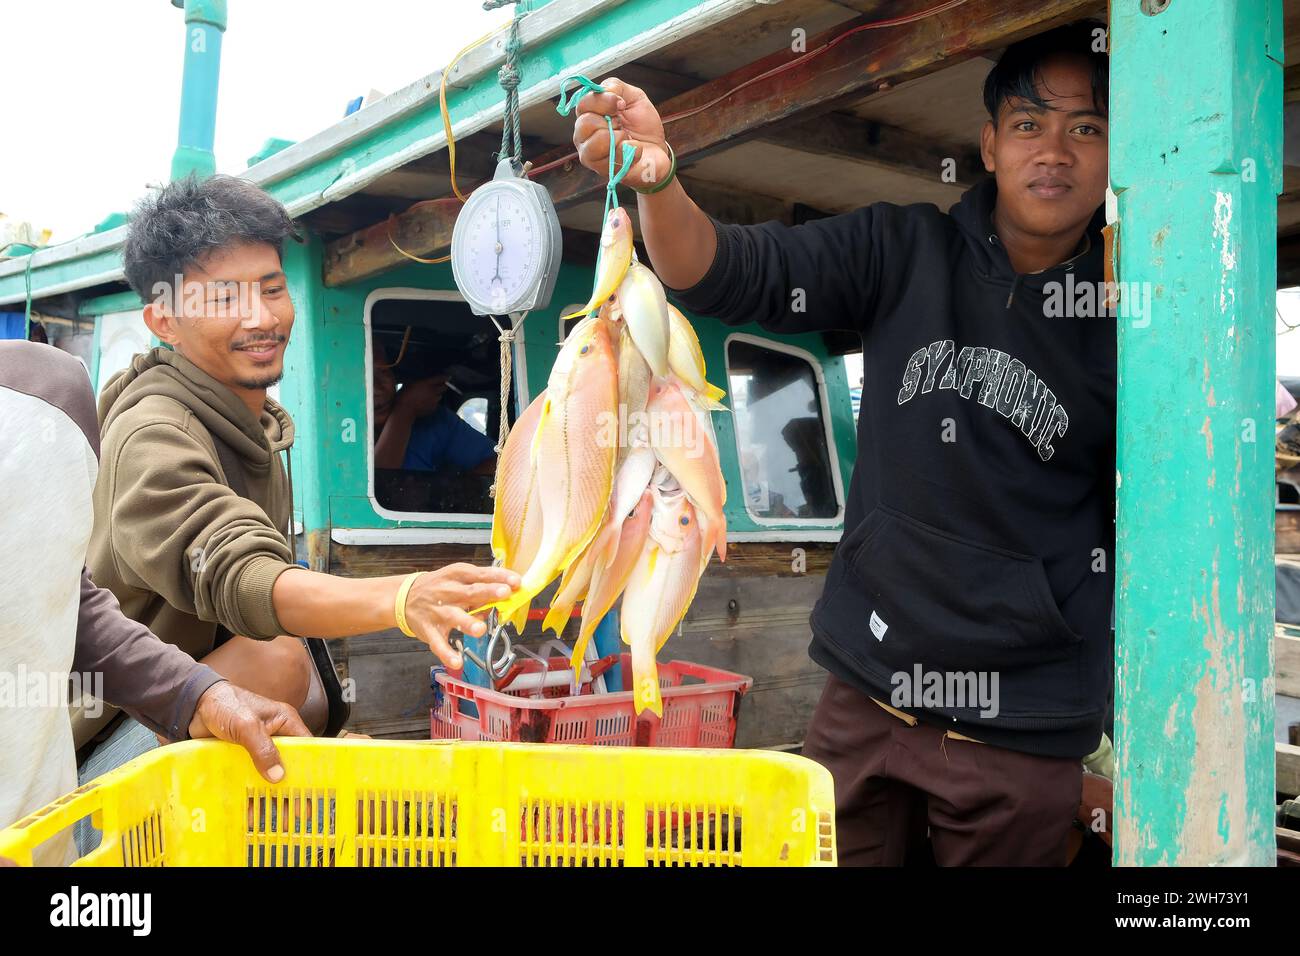 Lampung, Indonesia, 07 October 2022: Focusing on fish, an Indonesian man holds a fish hanger on a fishing boat in Lampung, Indonesia. Stock Photo